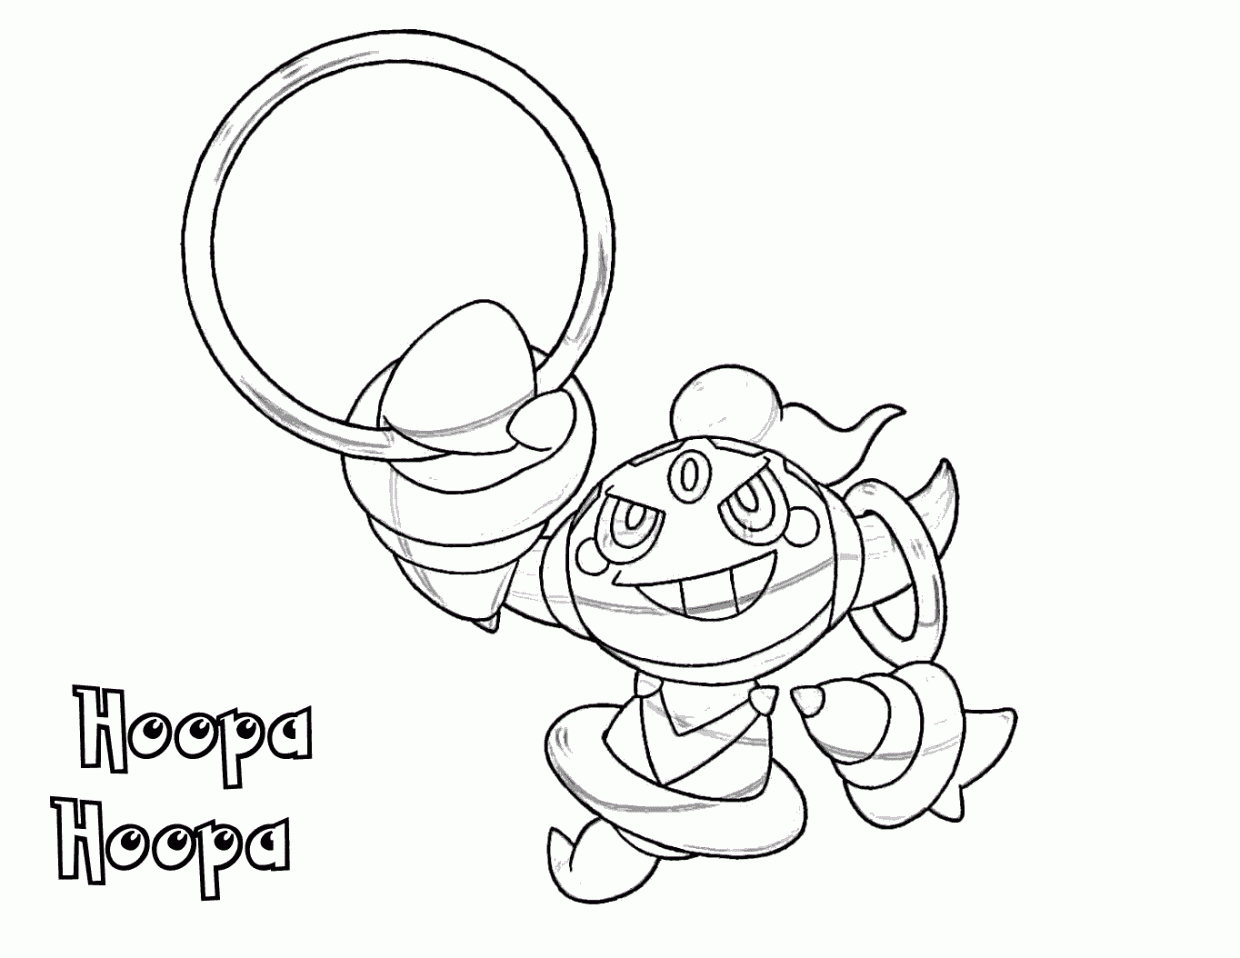 Pokemon Hoopa coloring pages